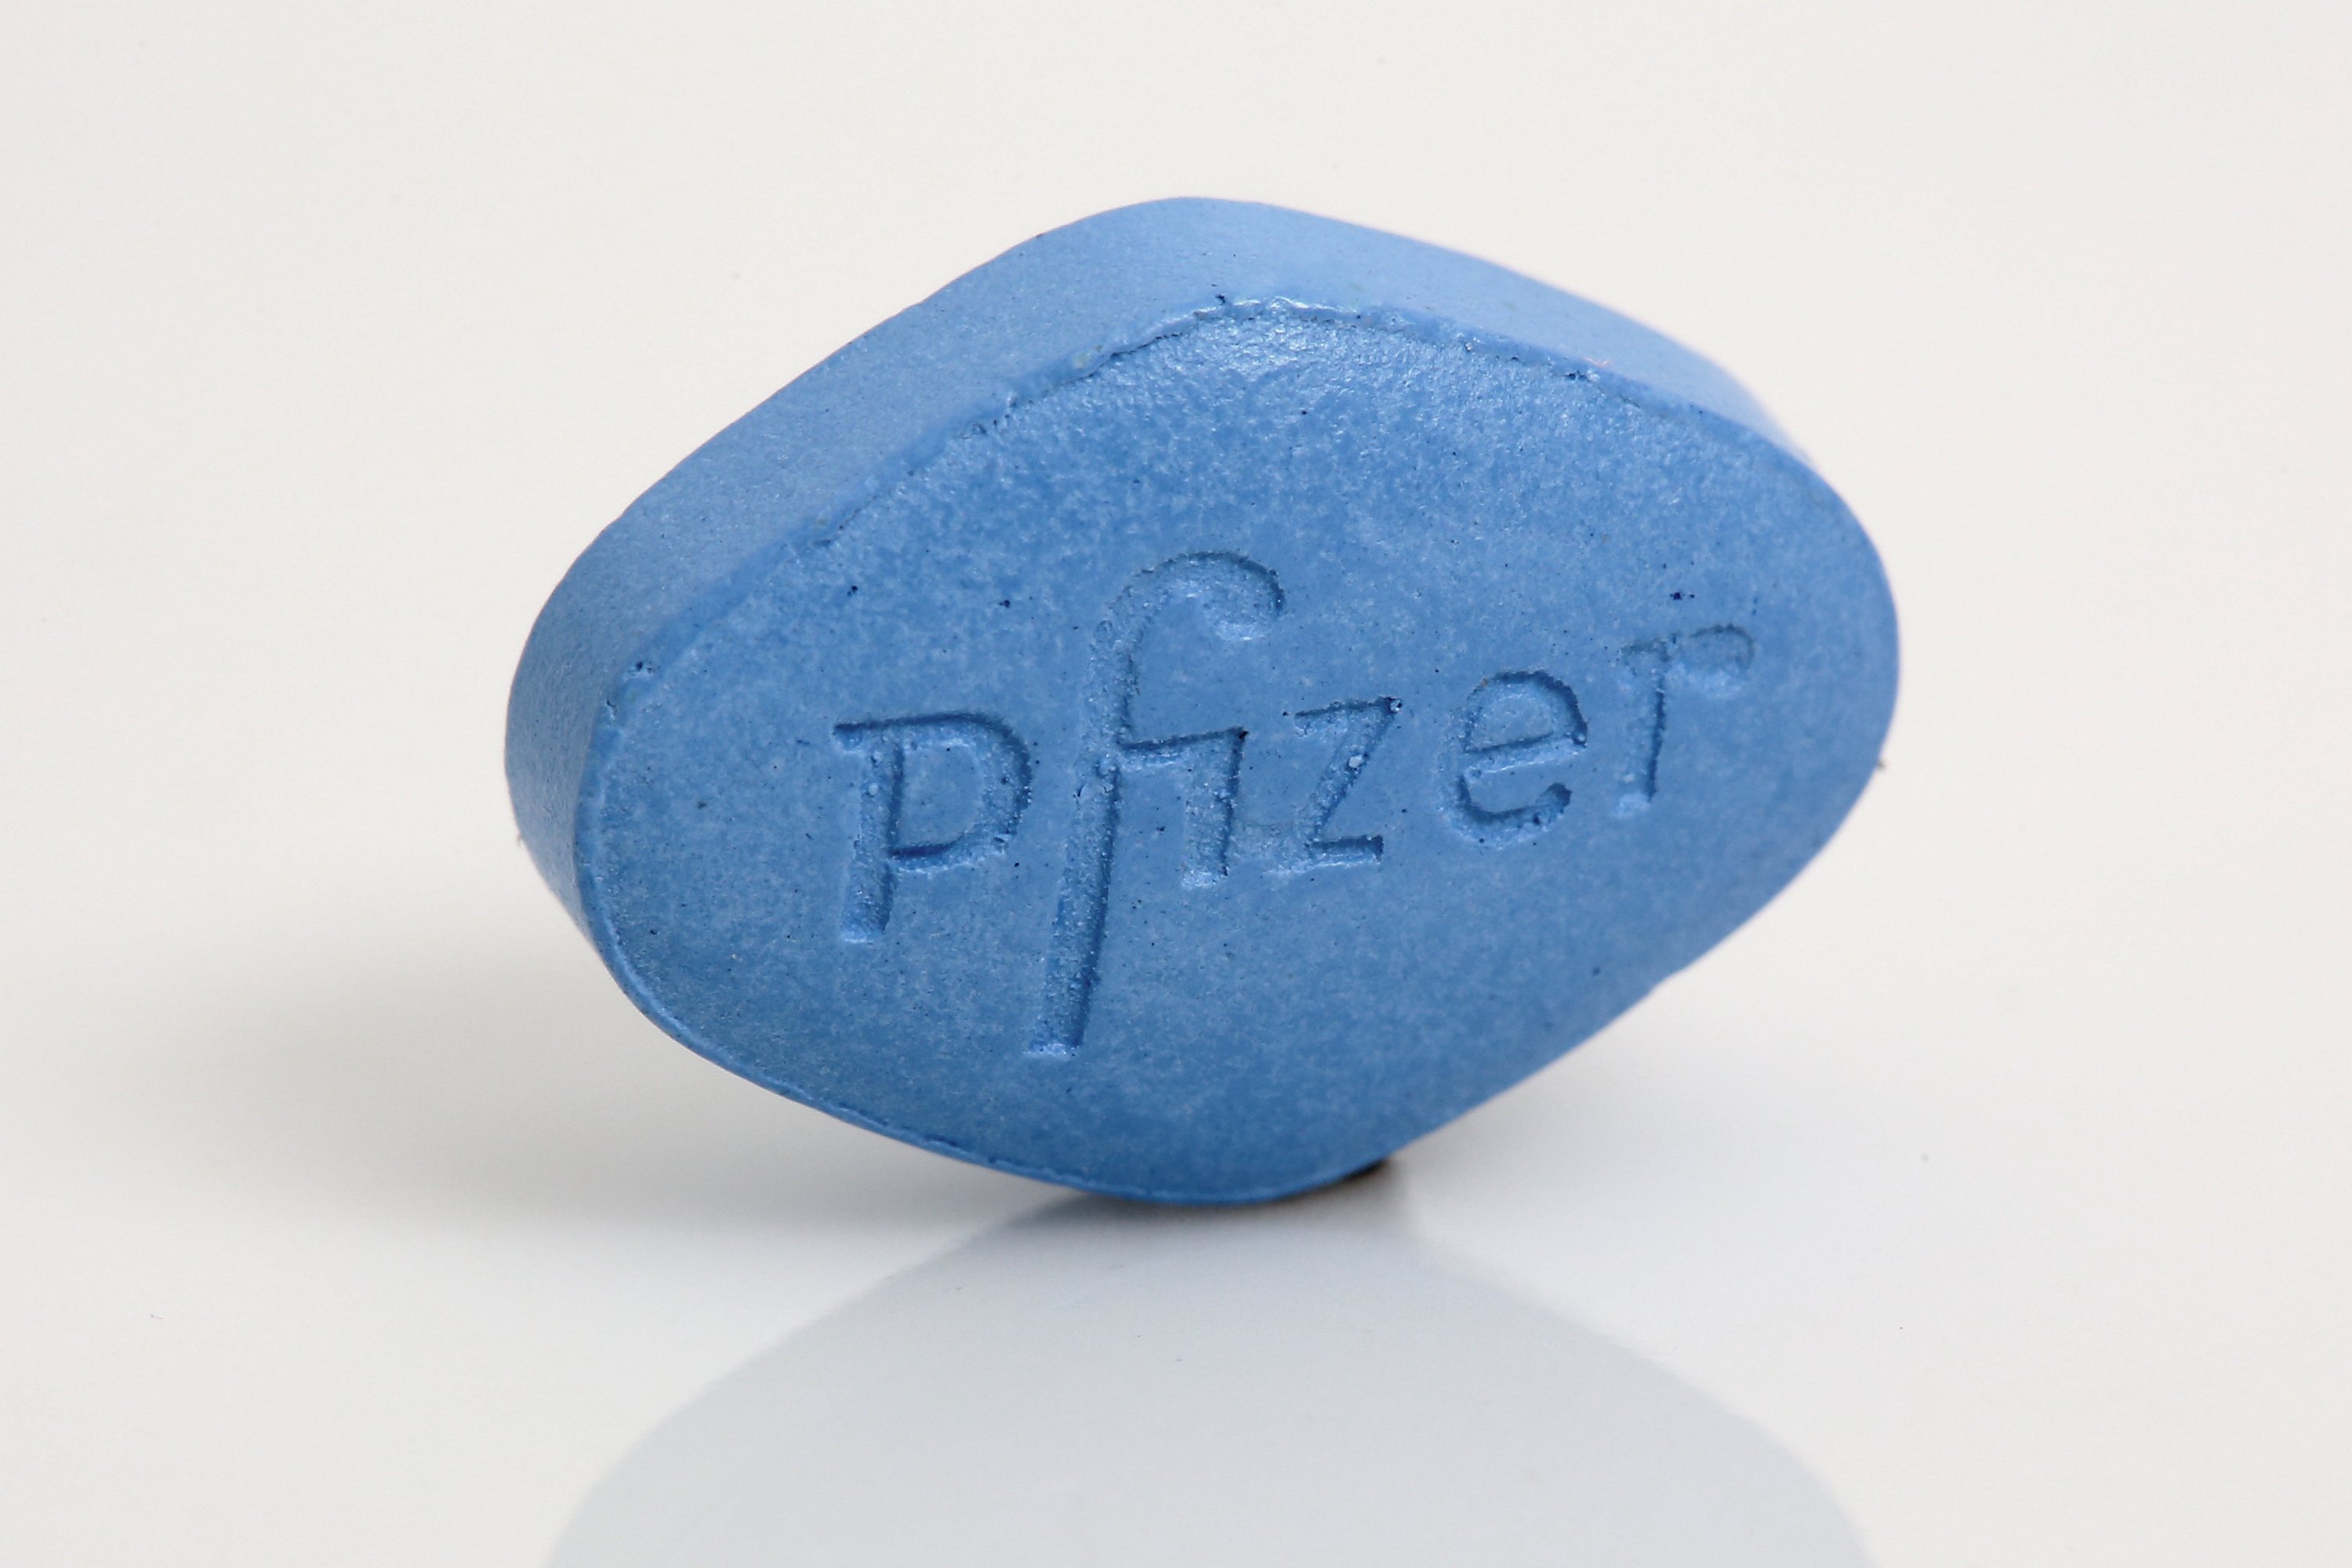 sphere take a picture Constricted Second time's the charm? Pfizer tries again with OTC Viagra in the U.K. |  Fierce Pharma